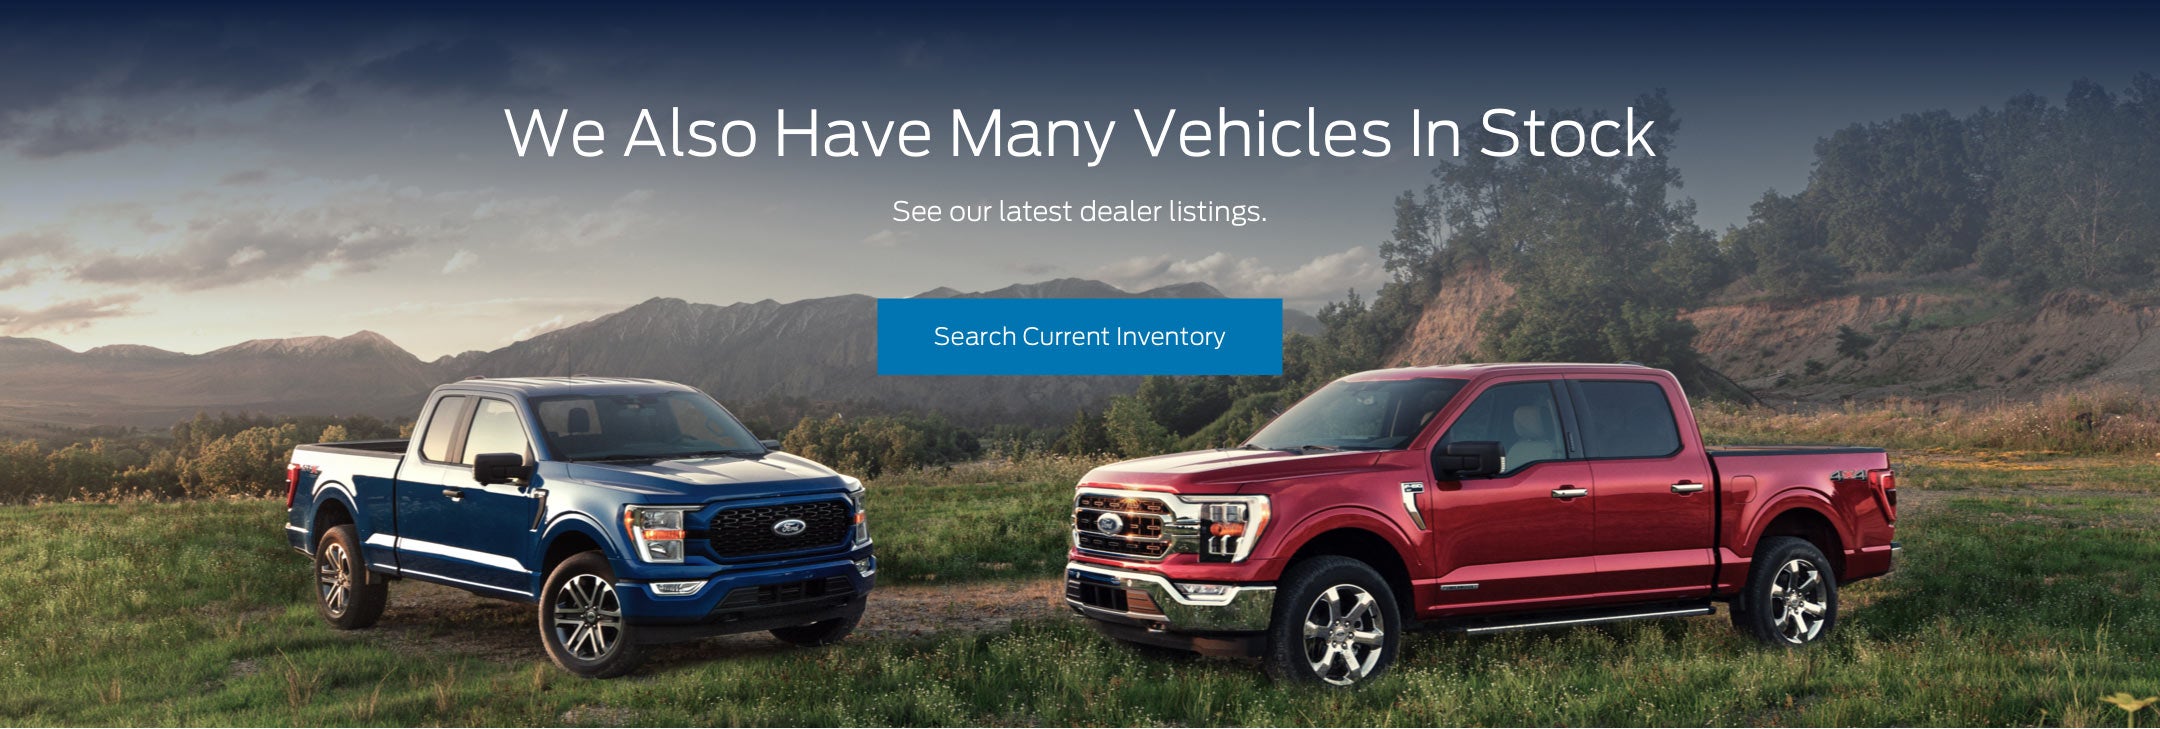 Ford vehicles in stock | Santa Fe Ford in Alachua FL